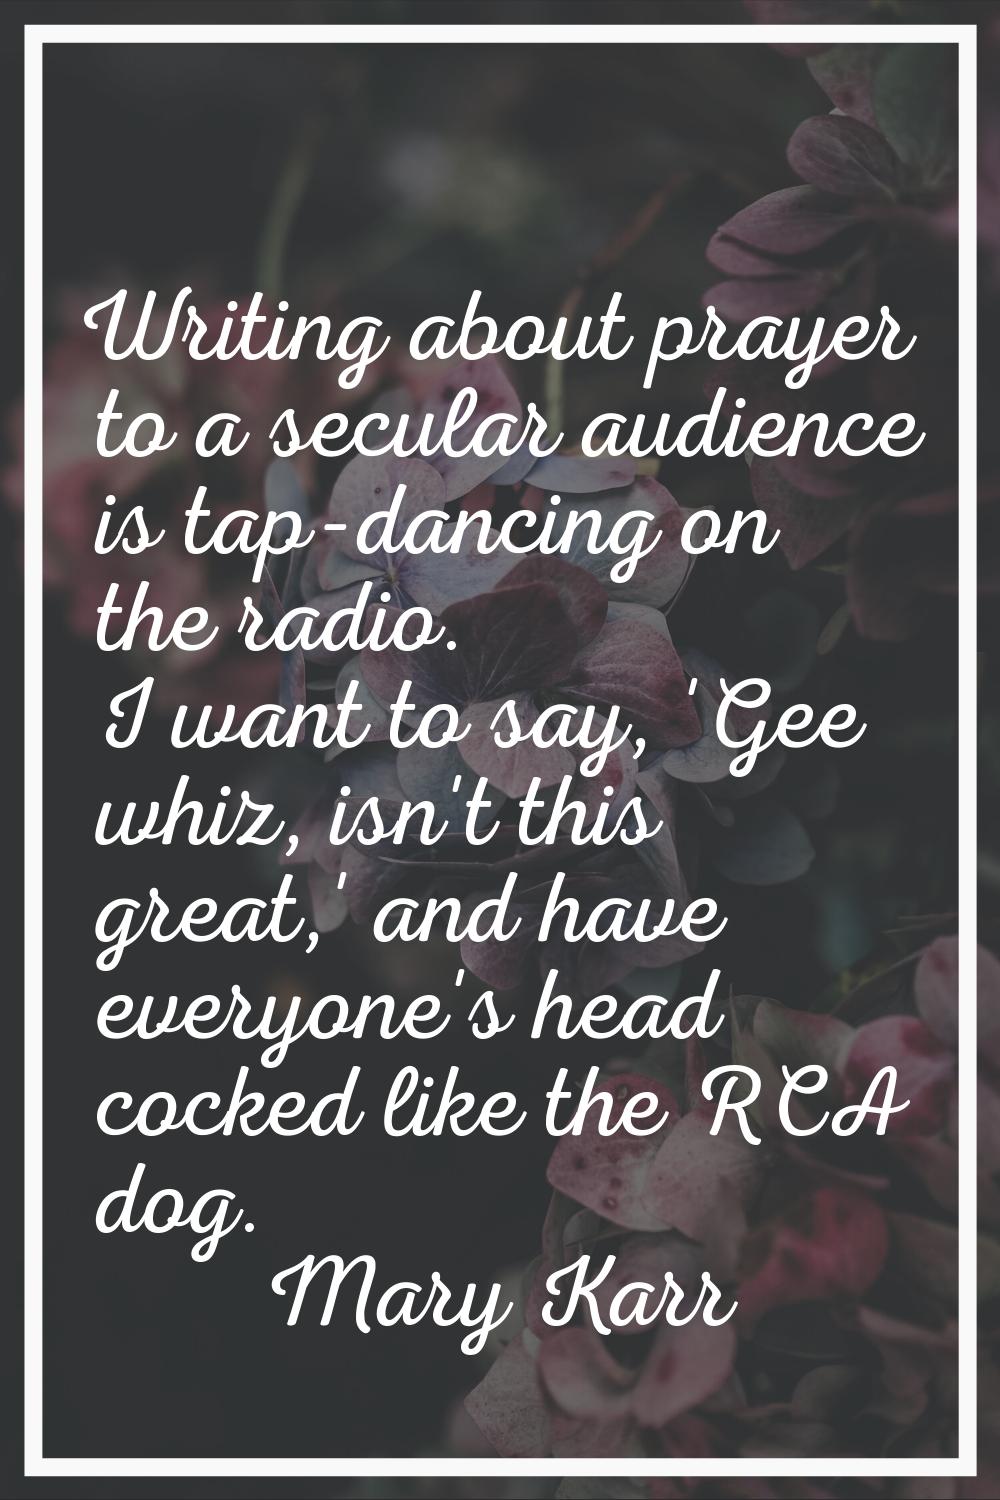 Writing about prayer to a secular audience is tap-dancing on the radio. I want to say, 'Gee whiz, i